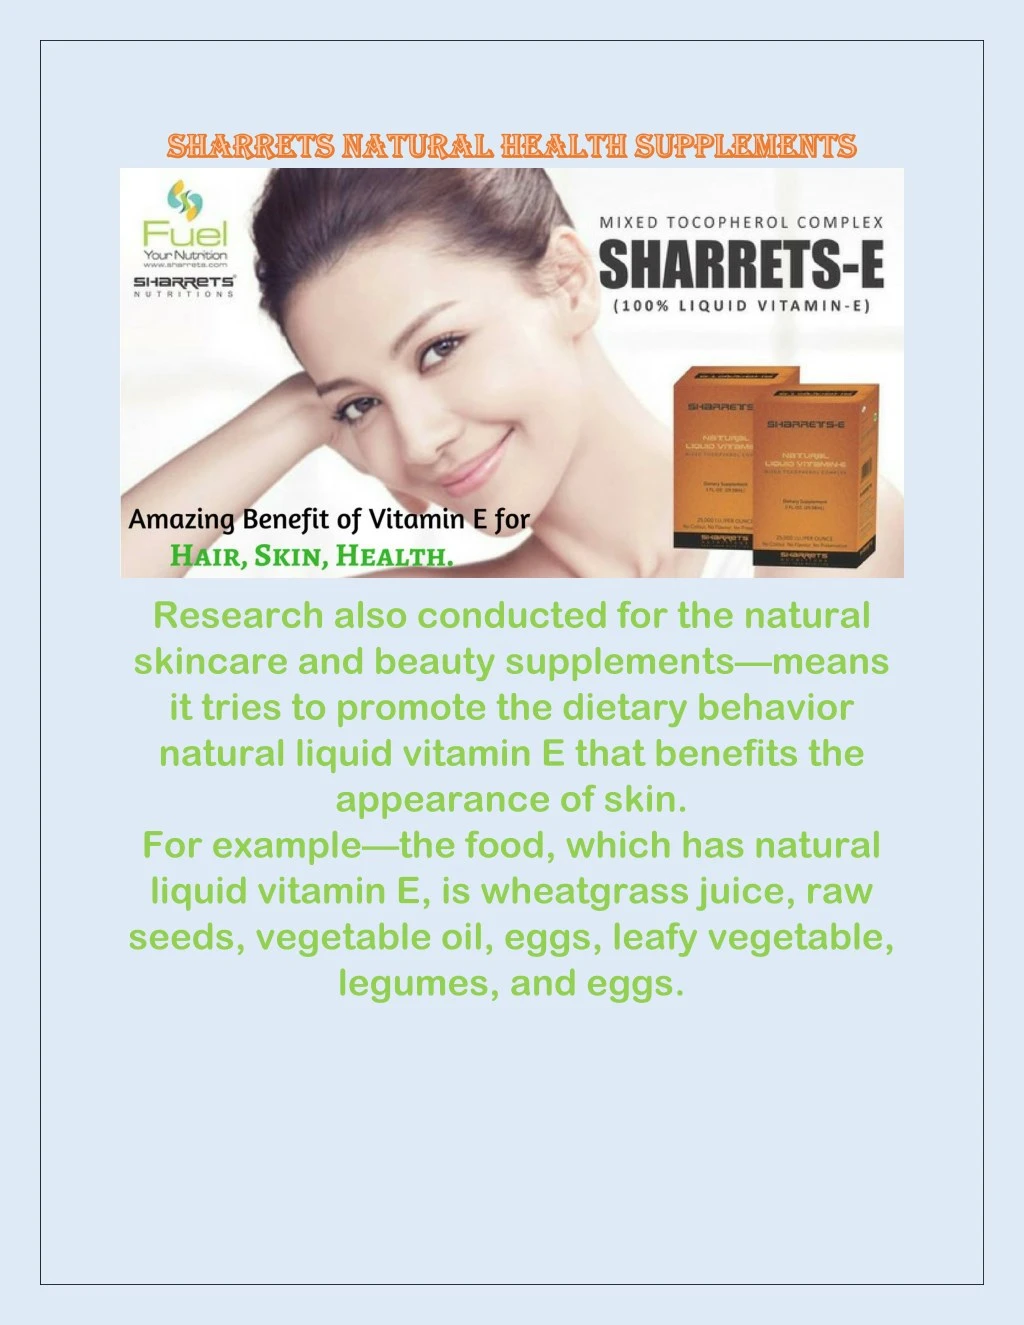 research also conducted for the natural skincare